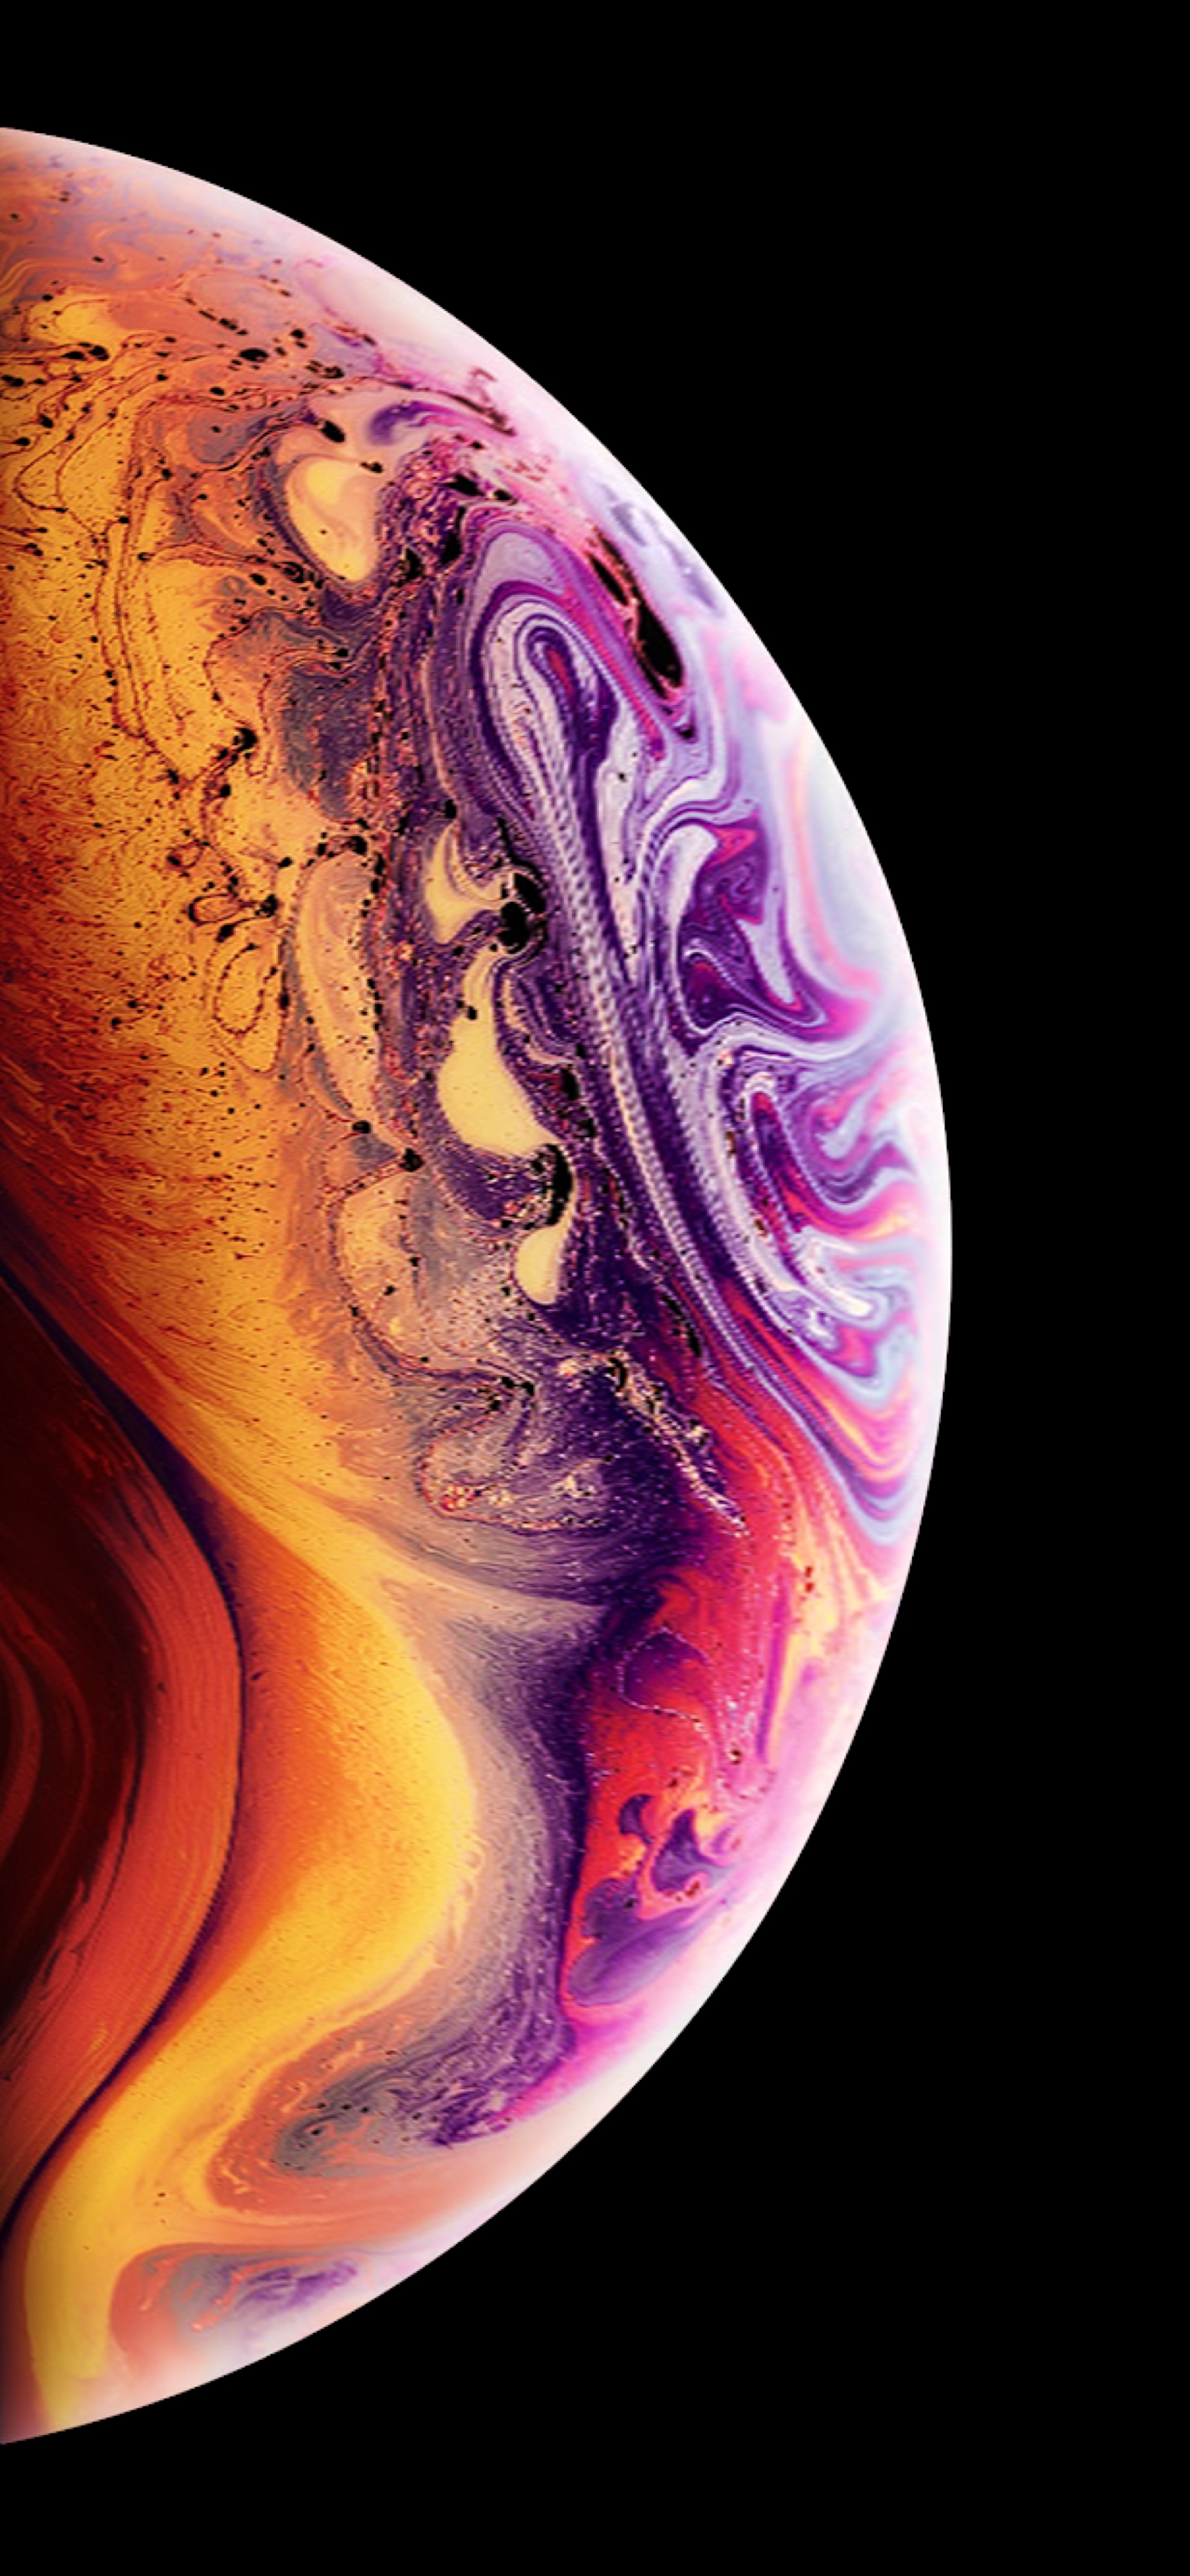 Iphone Xs Wallpaper For Iphone X And Xs Iphone - Iphone Xs 初期 壁紙 - HD Wallpaper 